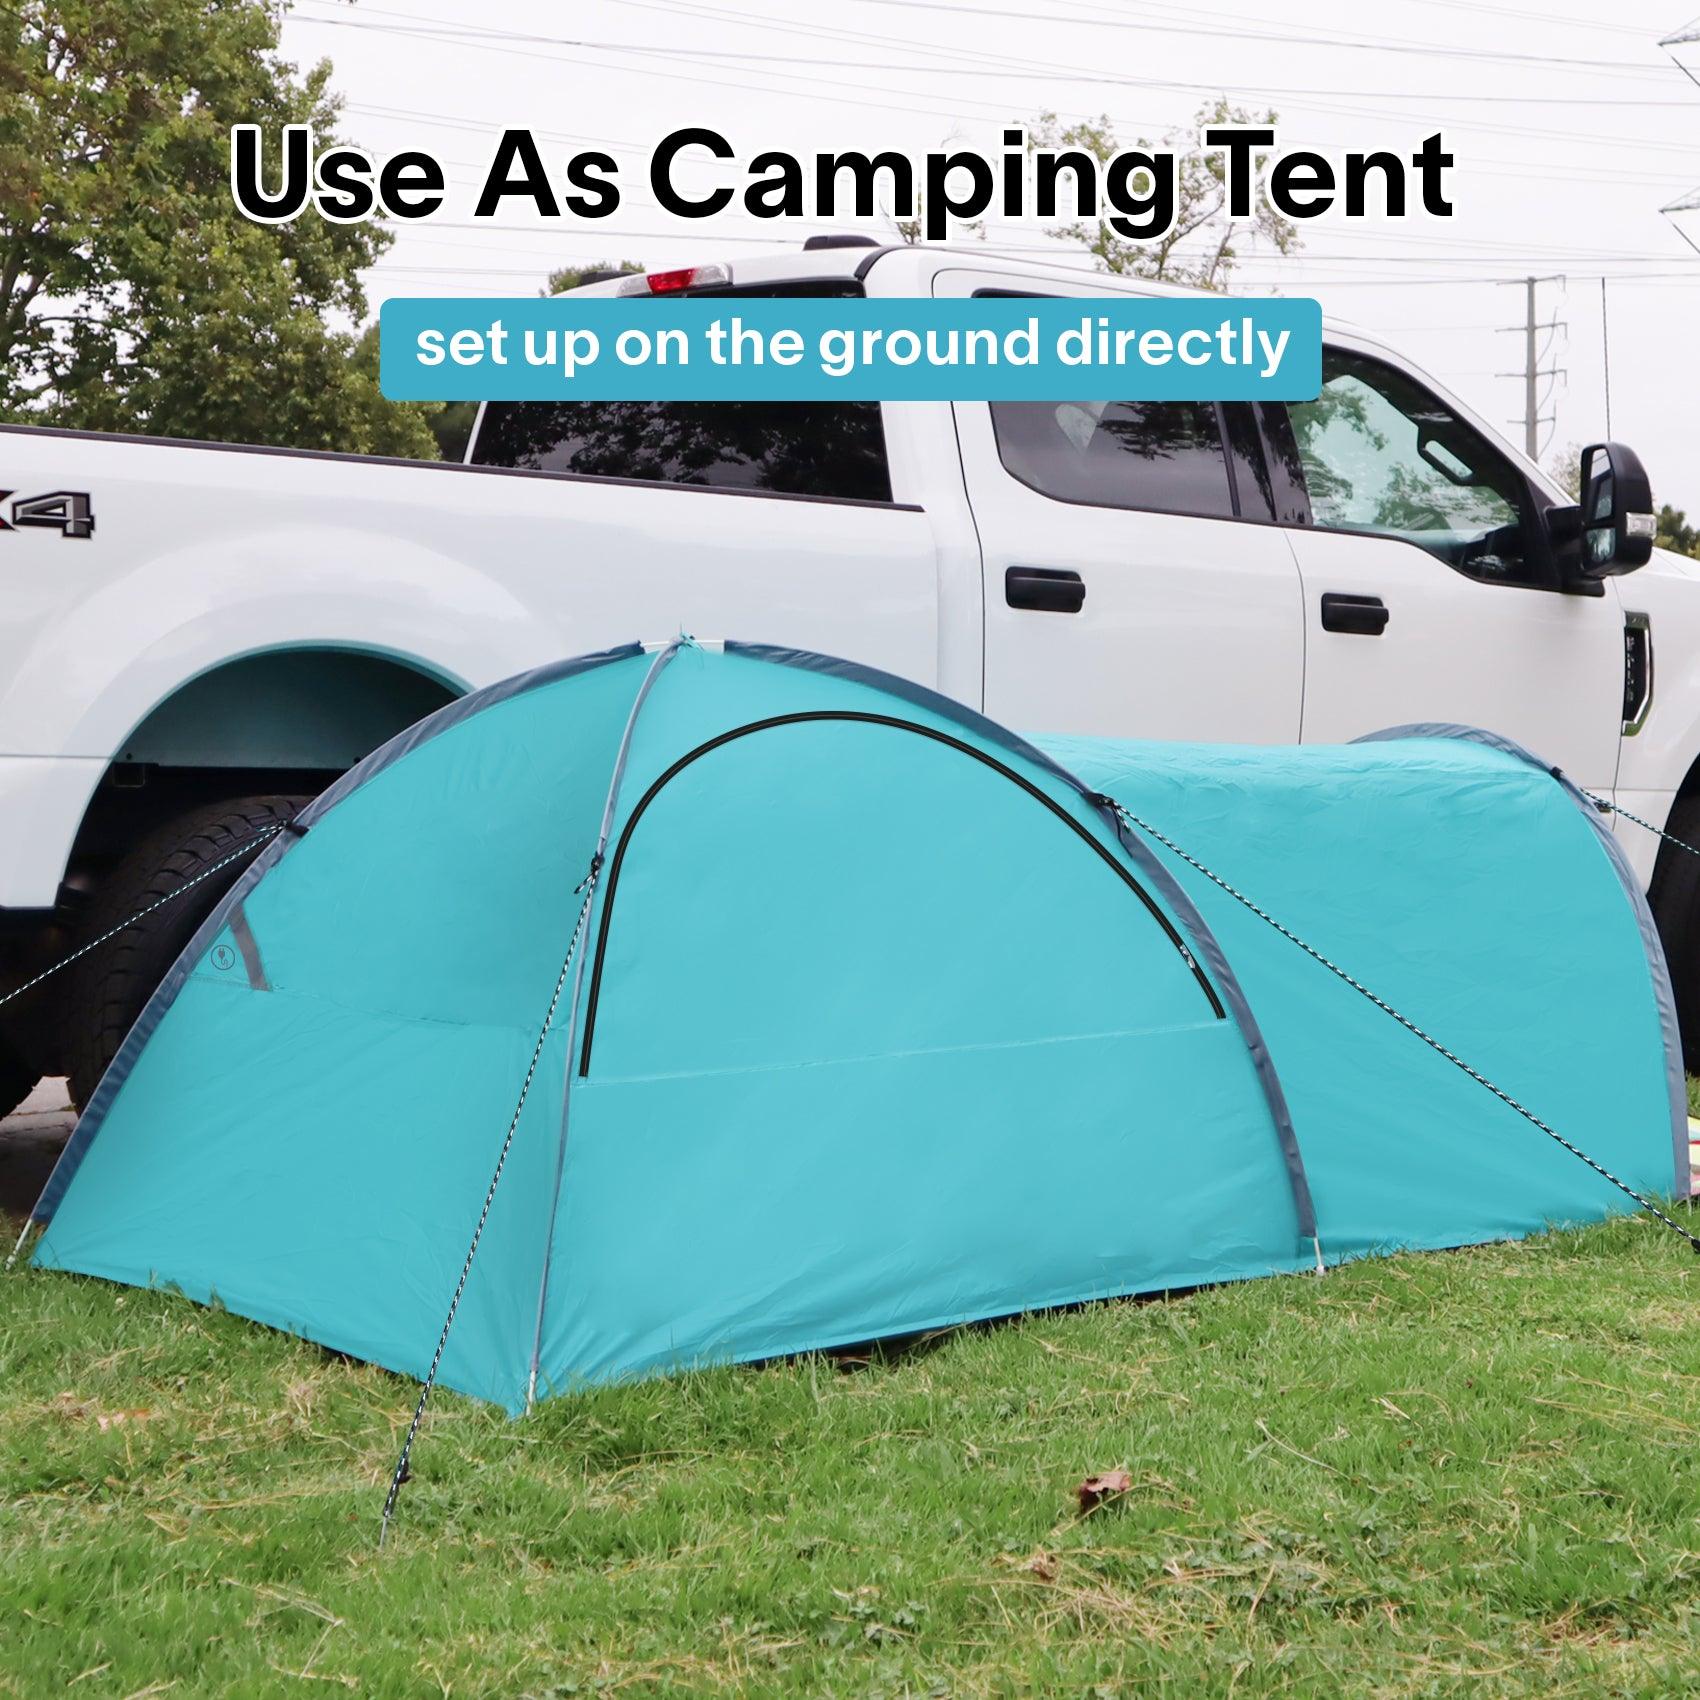 Truck Tent can also be used as tent for camping